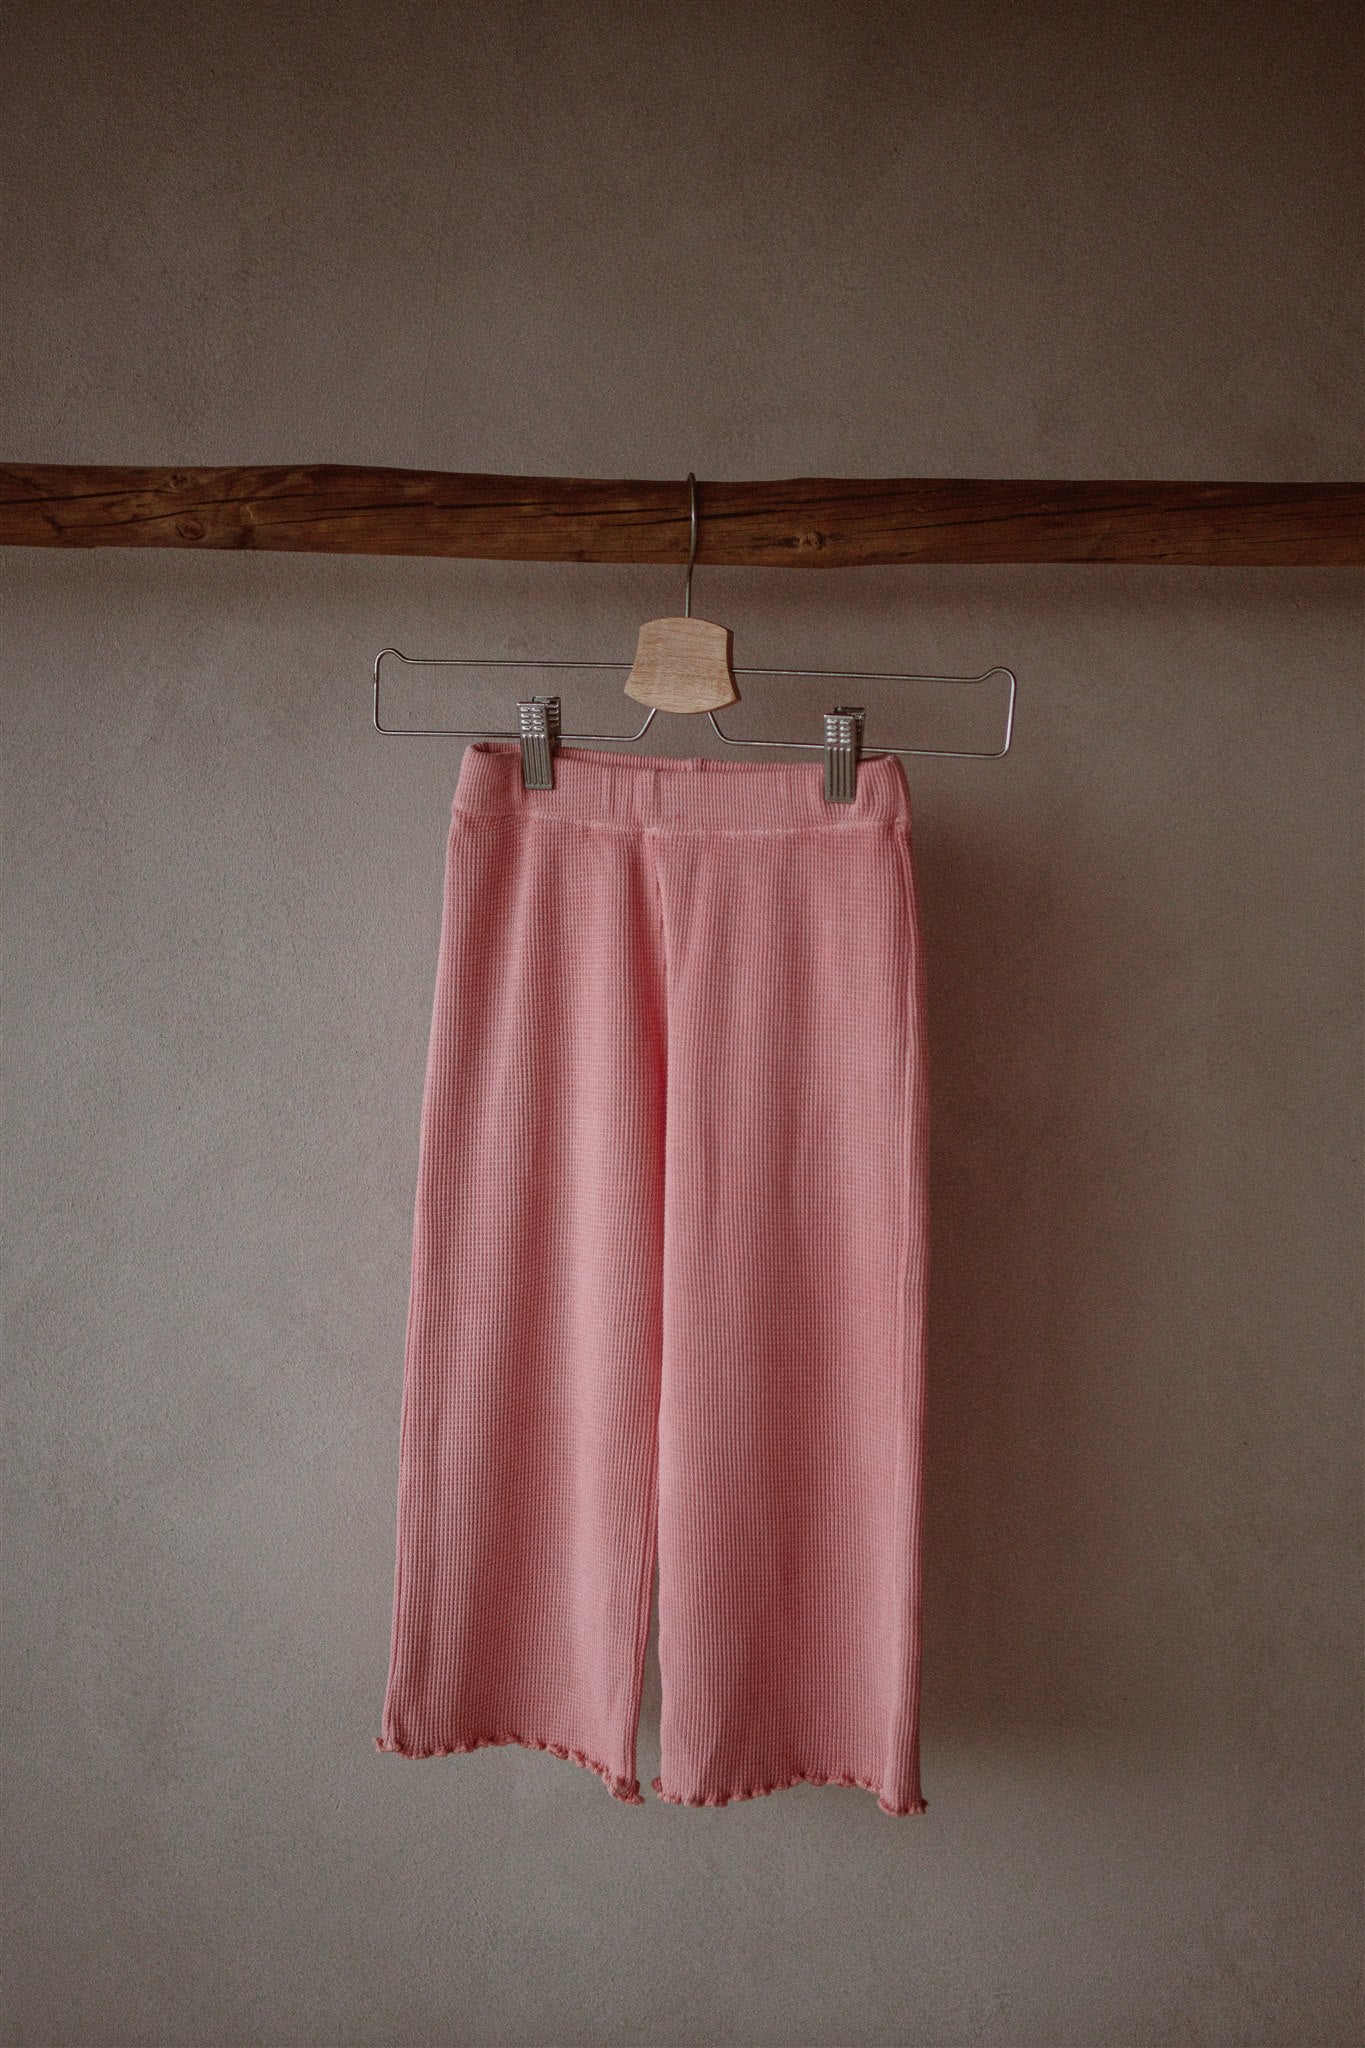 The Dreamy Pants - ROSE